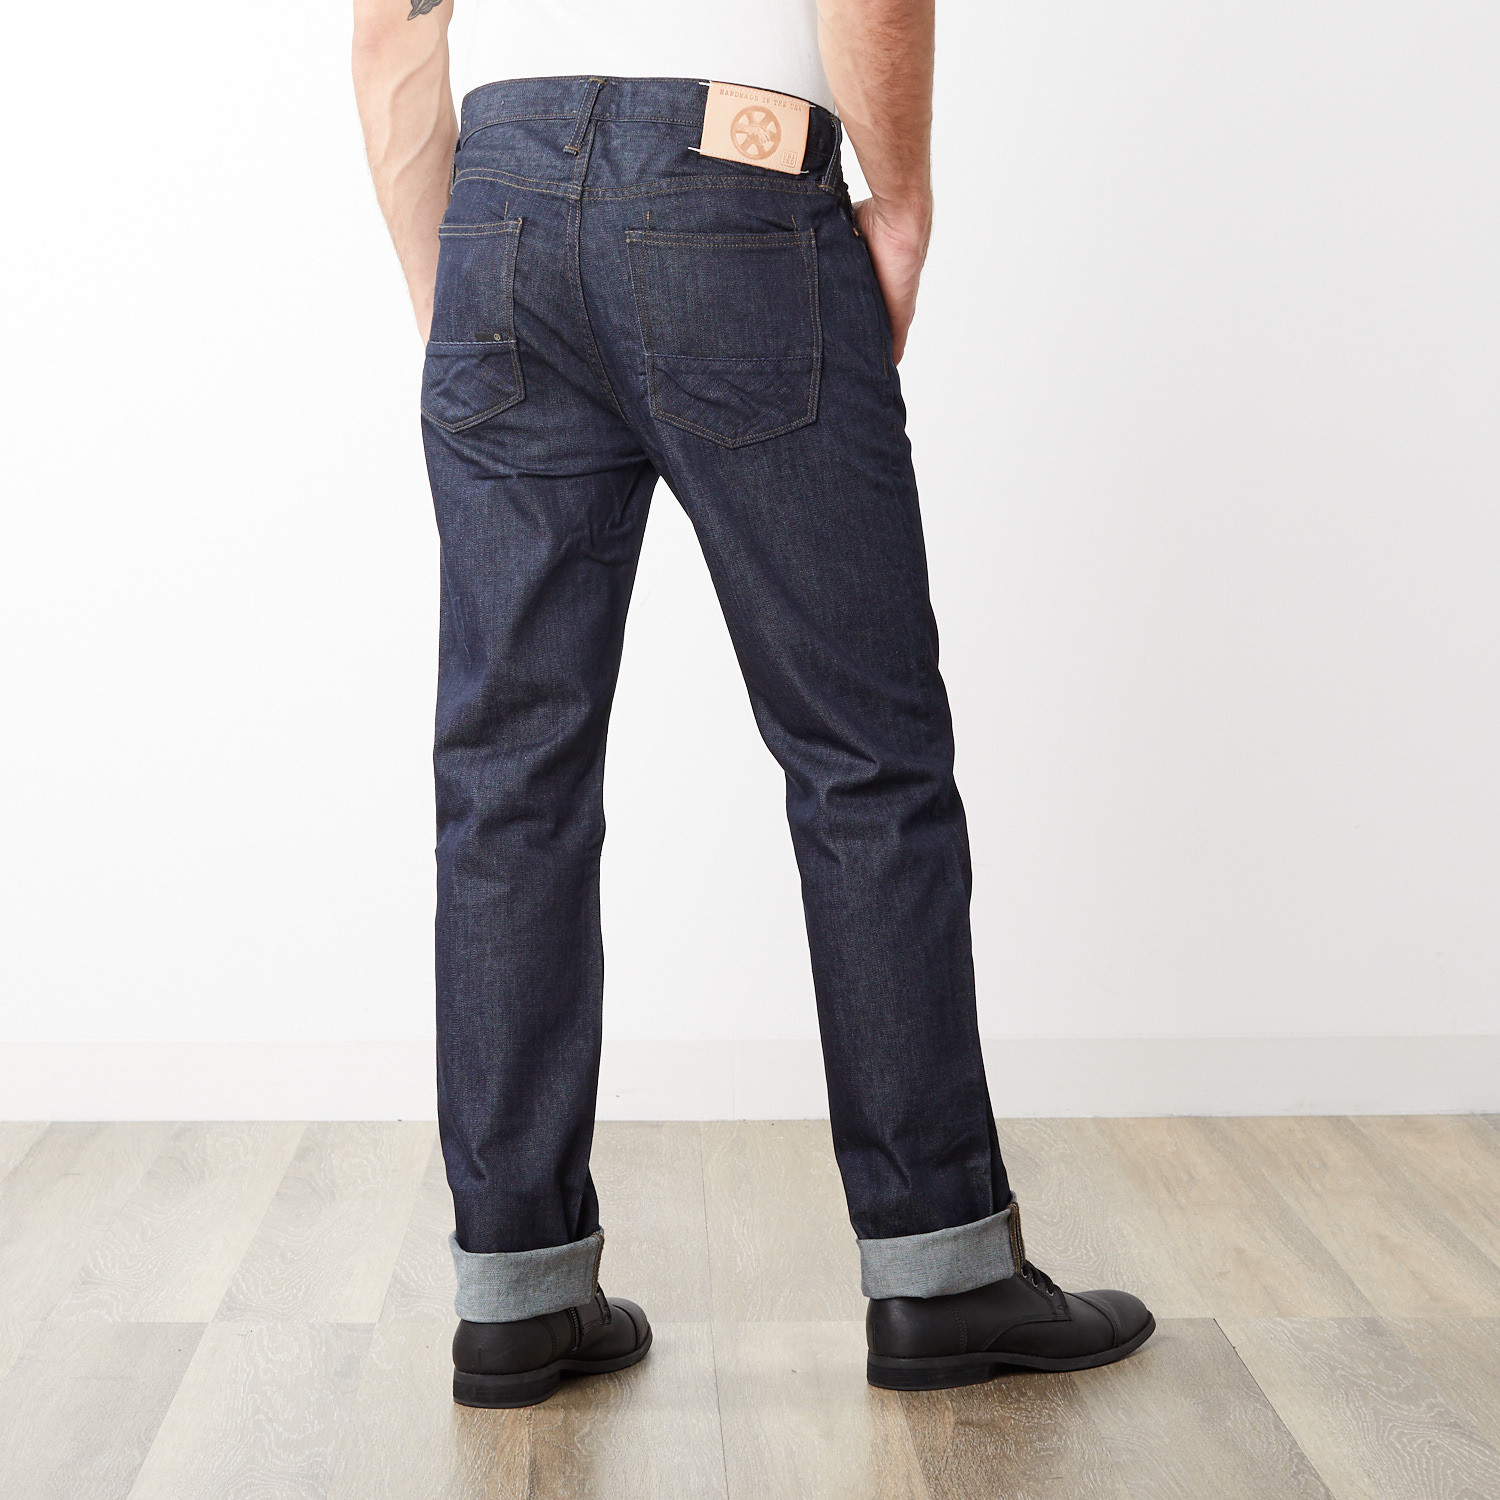 Less Water + Less Waste Wash Right Hand Twill Denim // Classic Fit ...